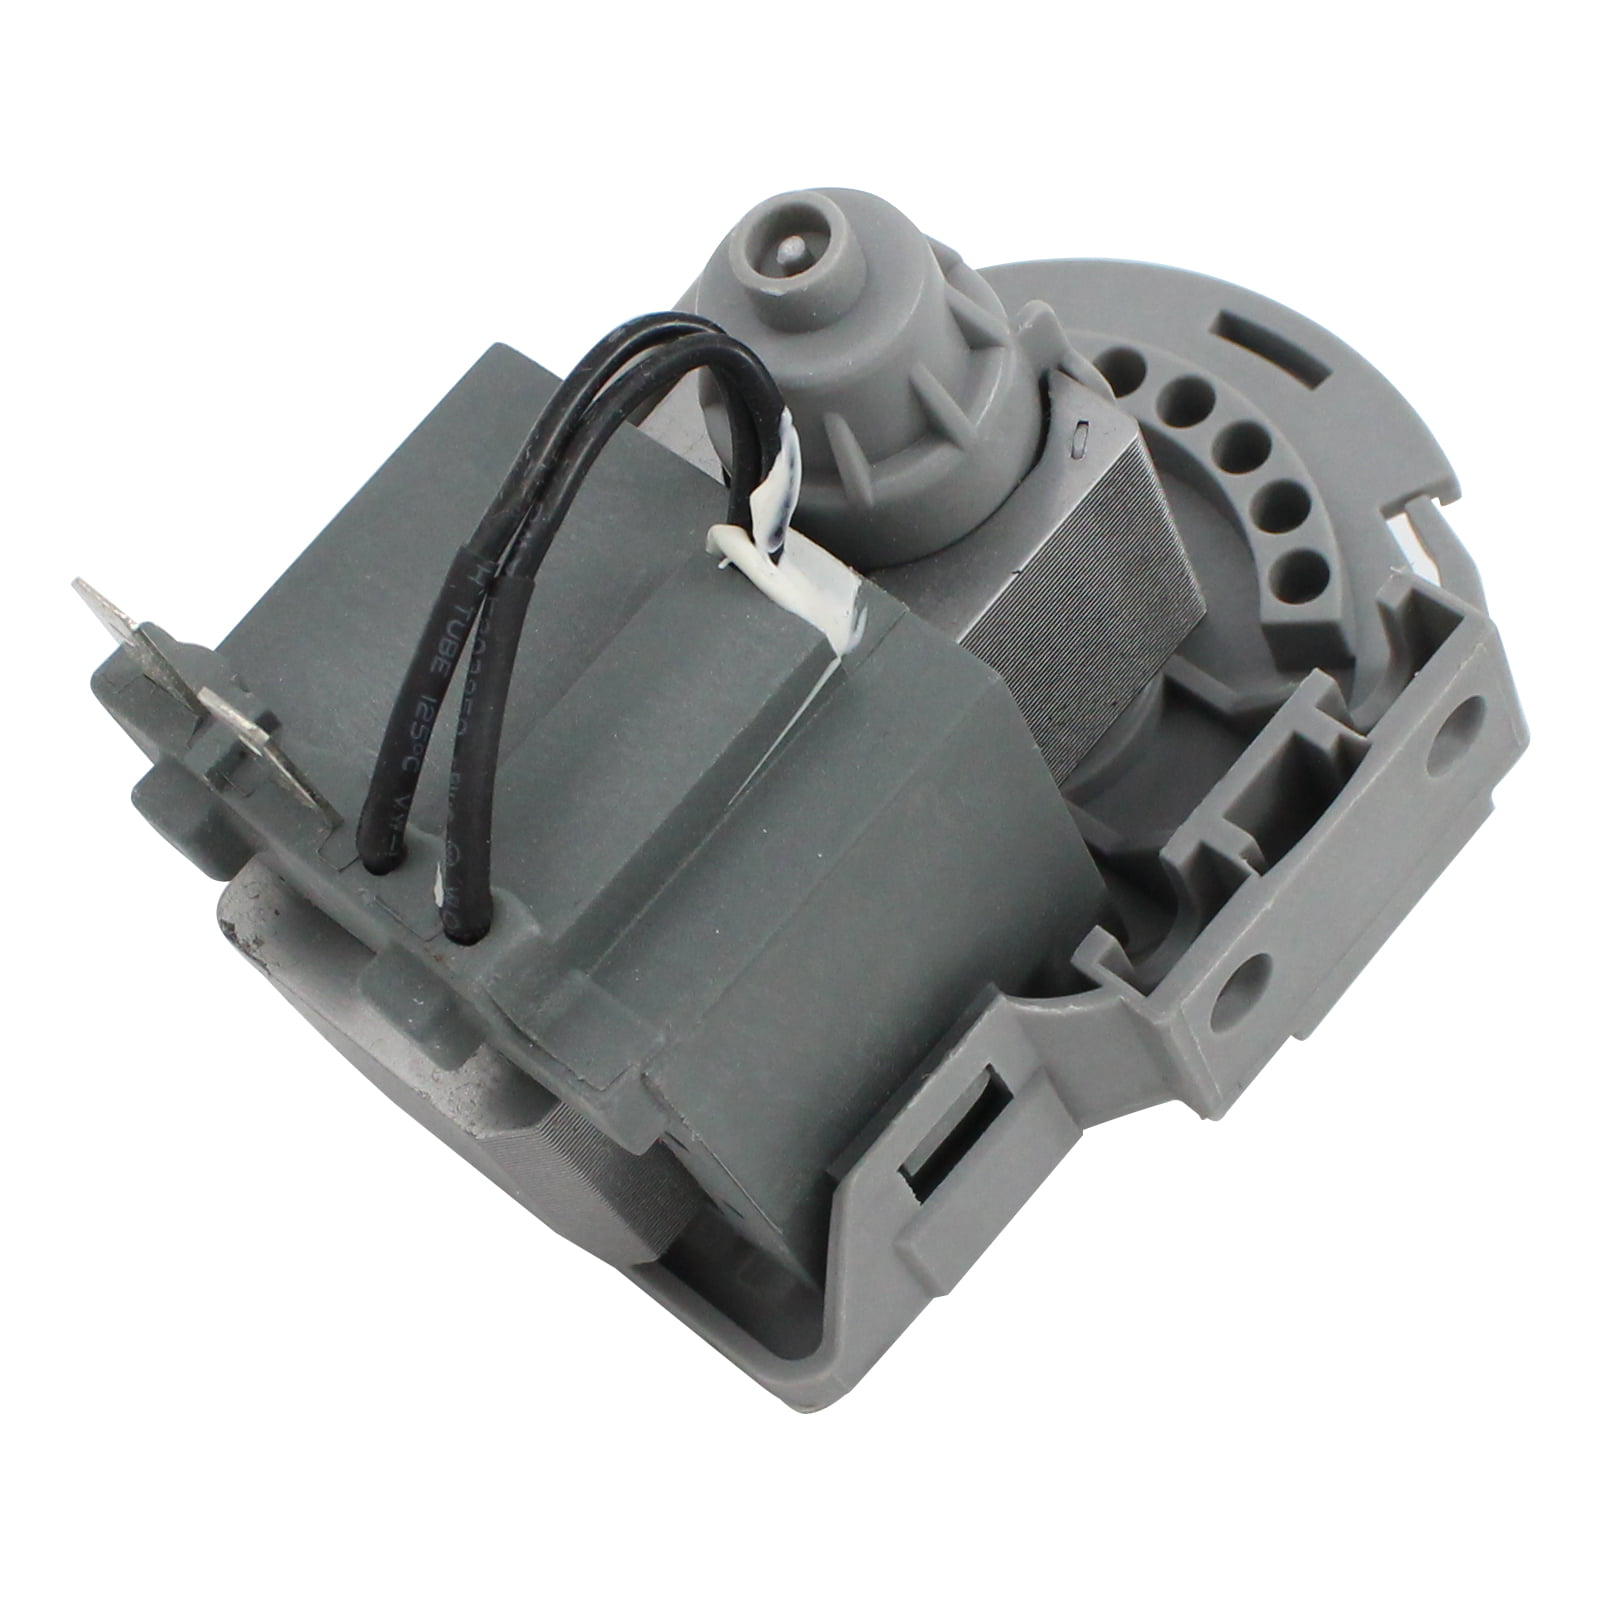 Details about   Dishwasher Drain Pump for Samsung DD31-00005A AP4342621 PS4222308 